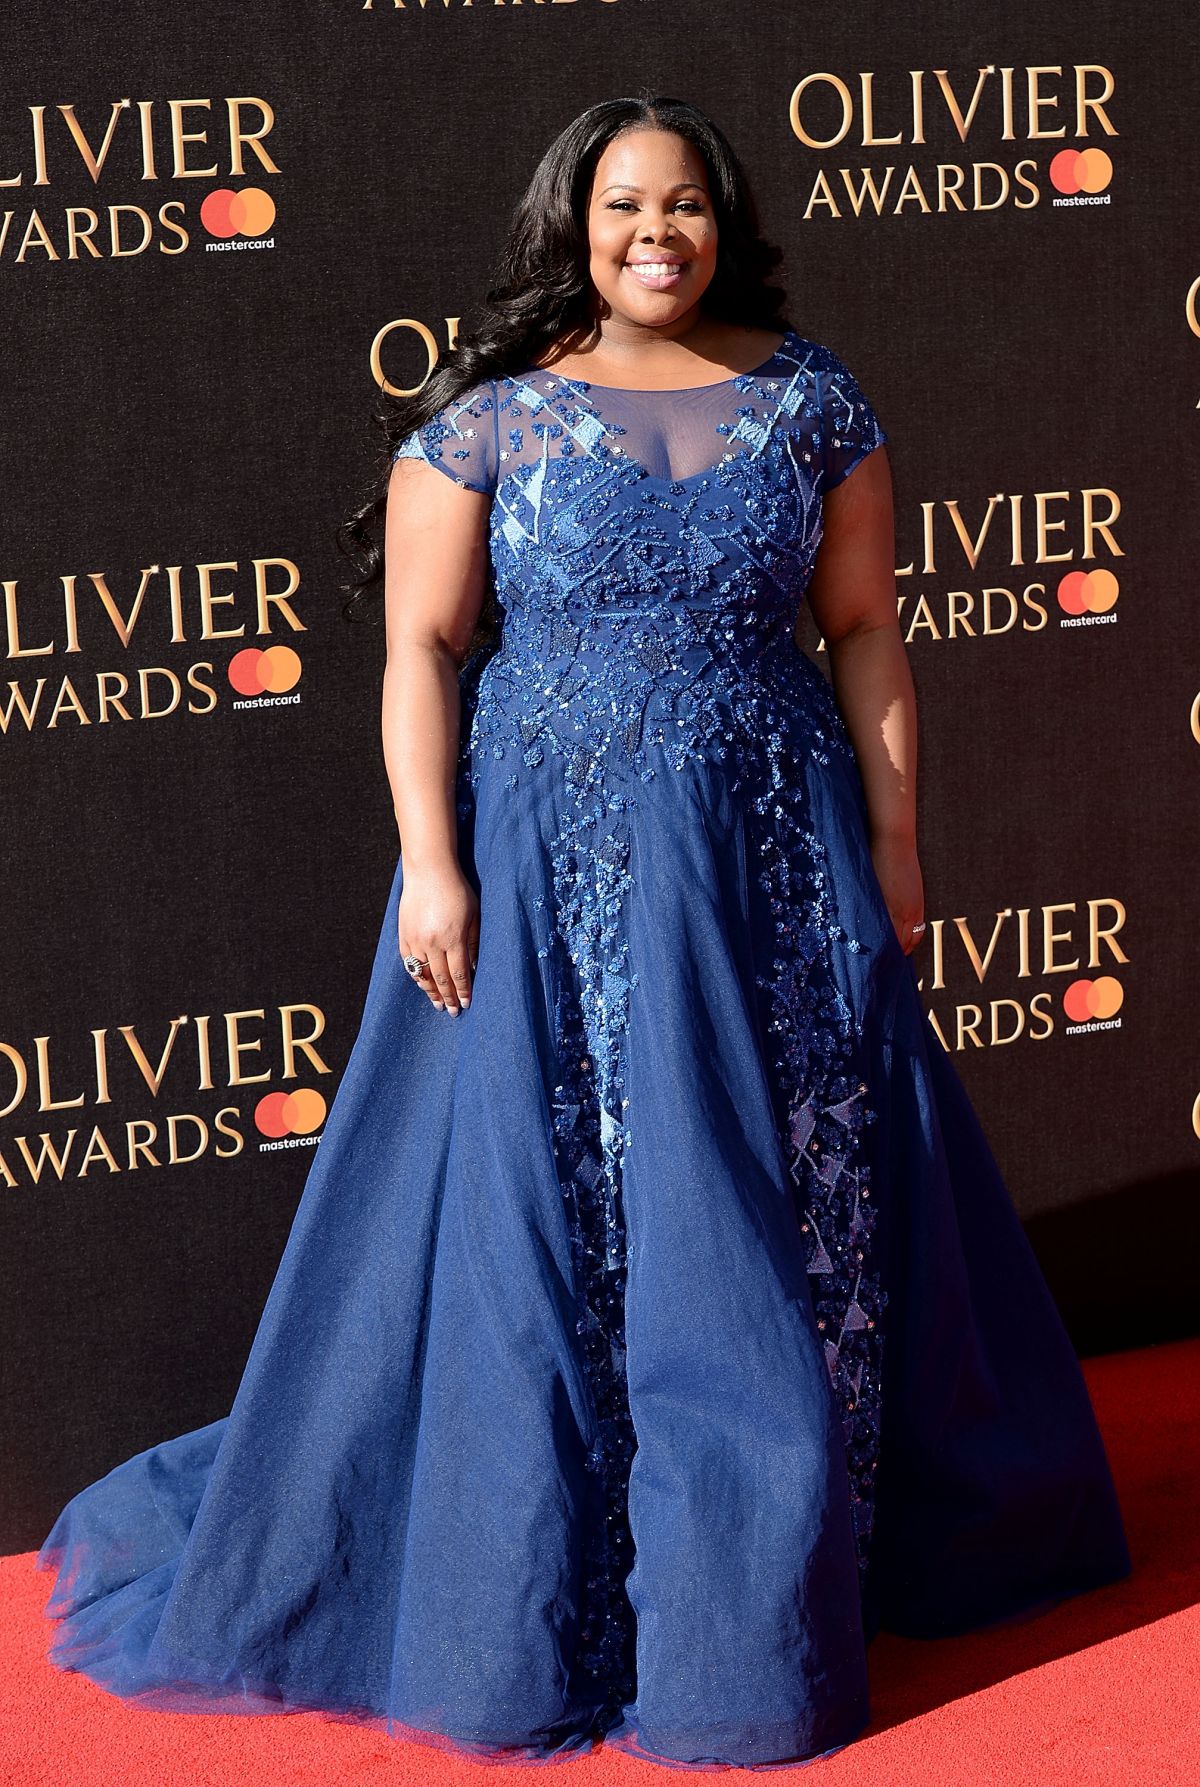 AMBER RILEY at Olivier Awards in London 04/09/2017